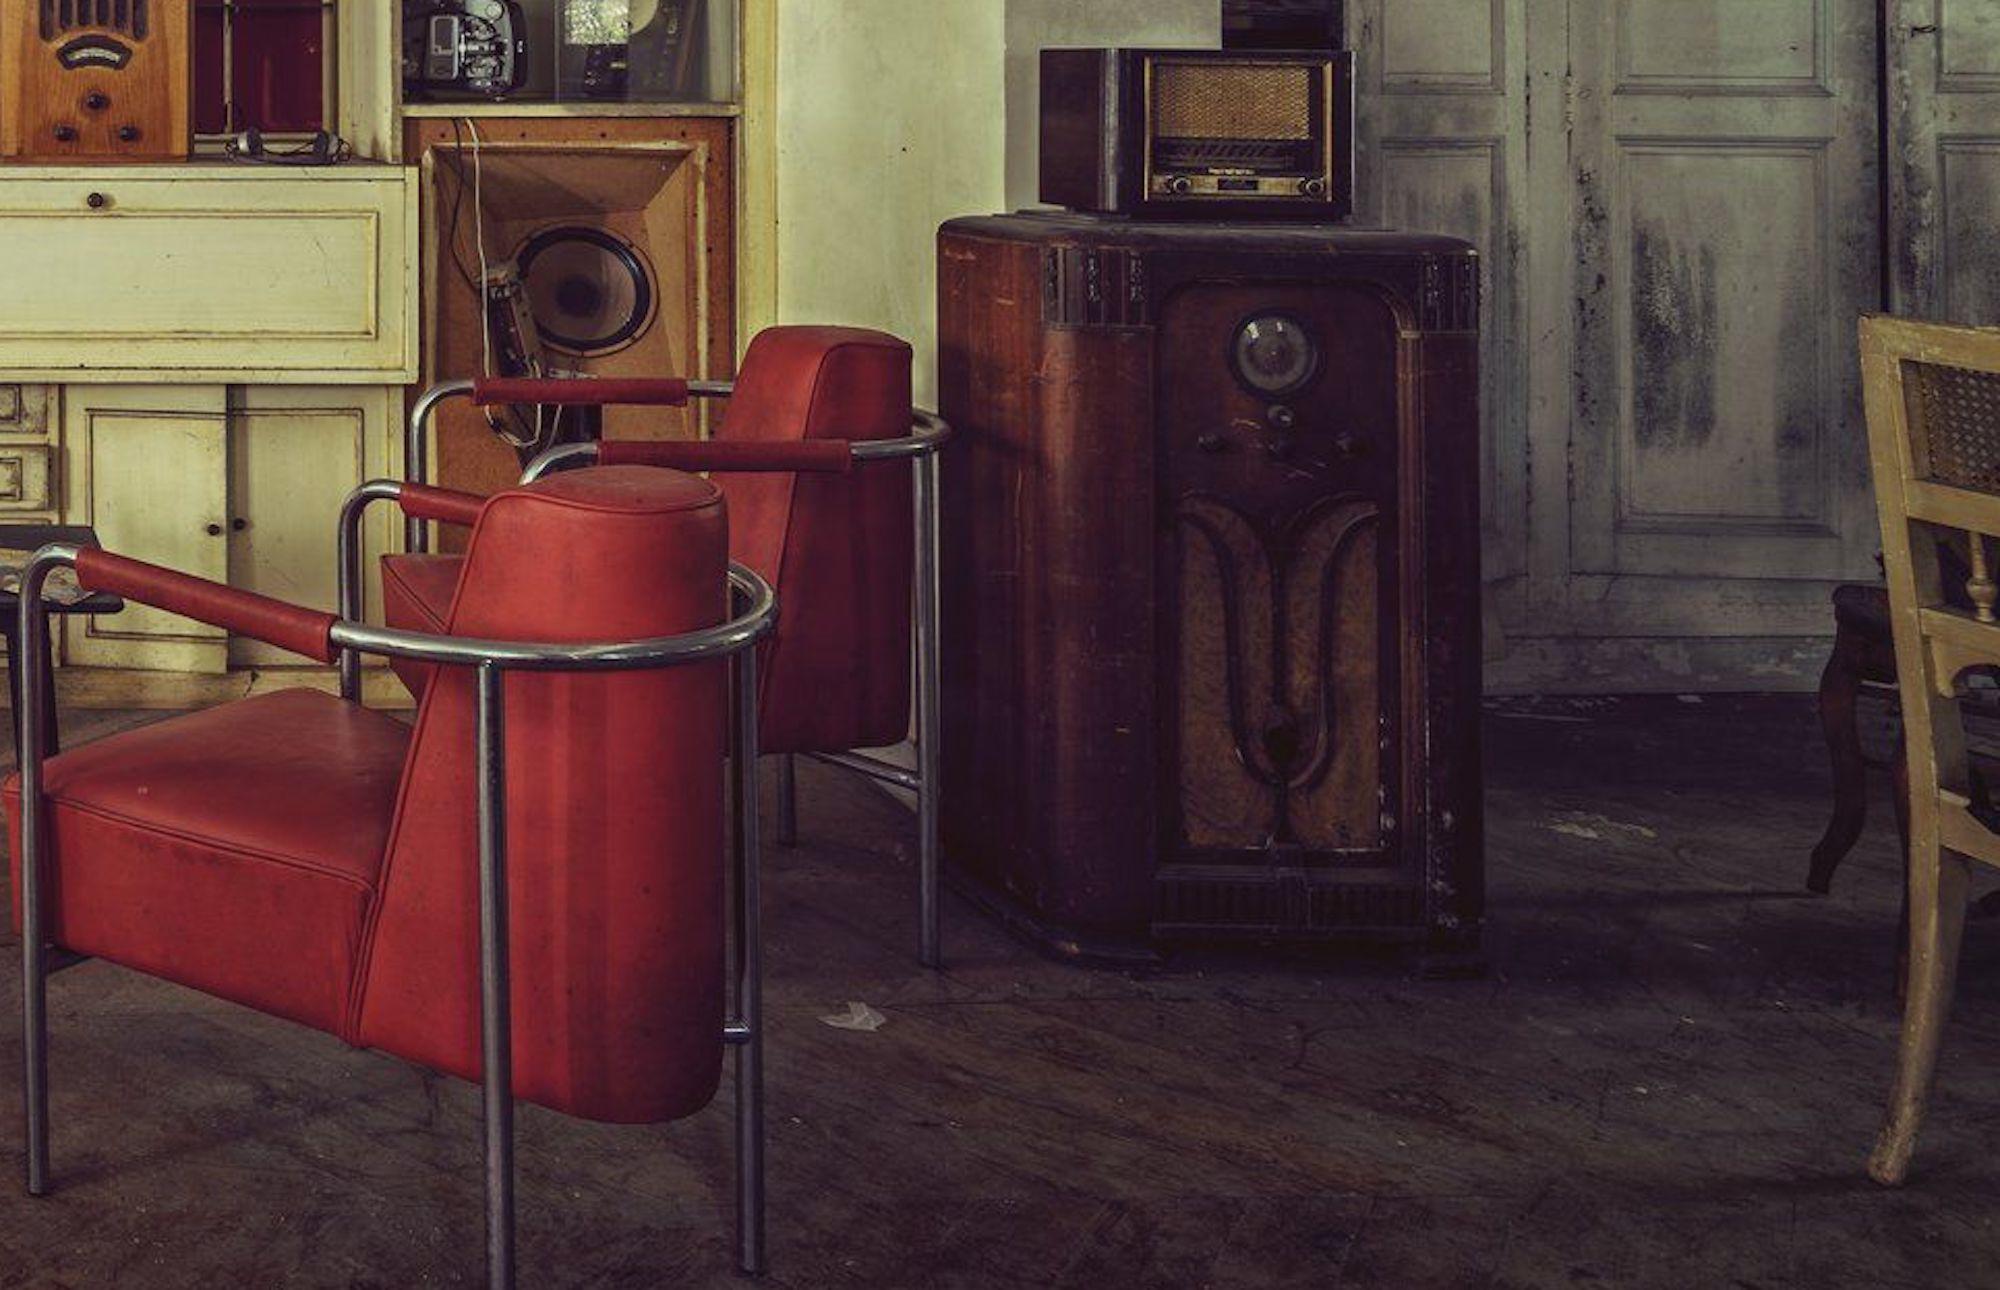 Radios in Lounge by Gina Soden - Abandoned place, urbex photography, red chairs For Sale 4